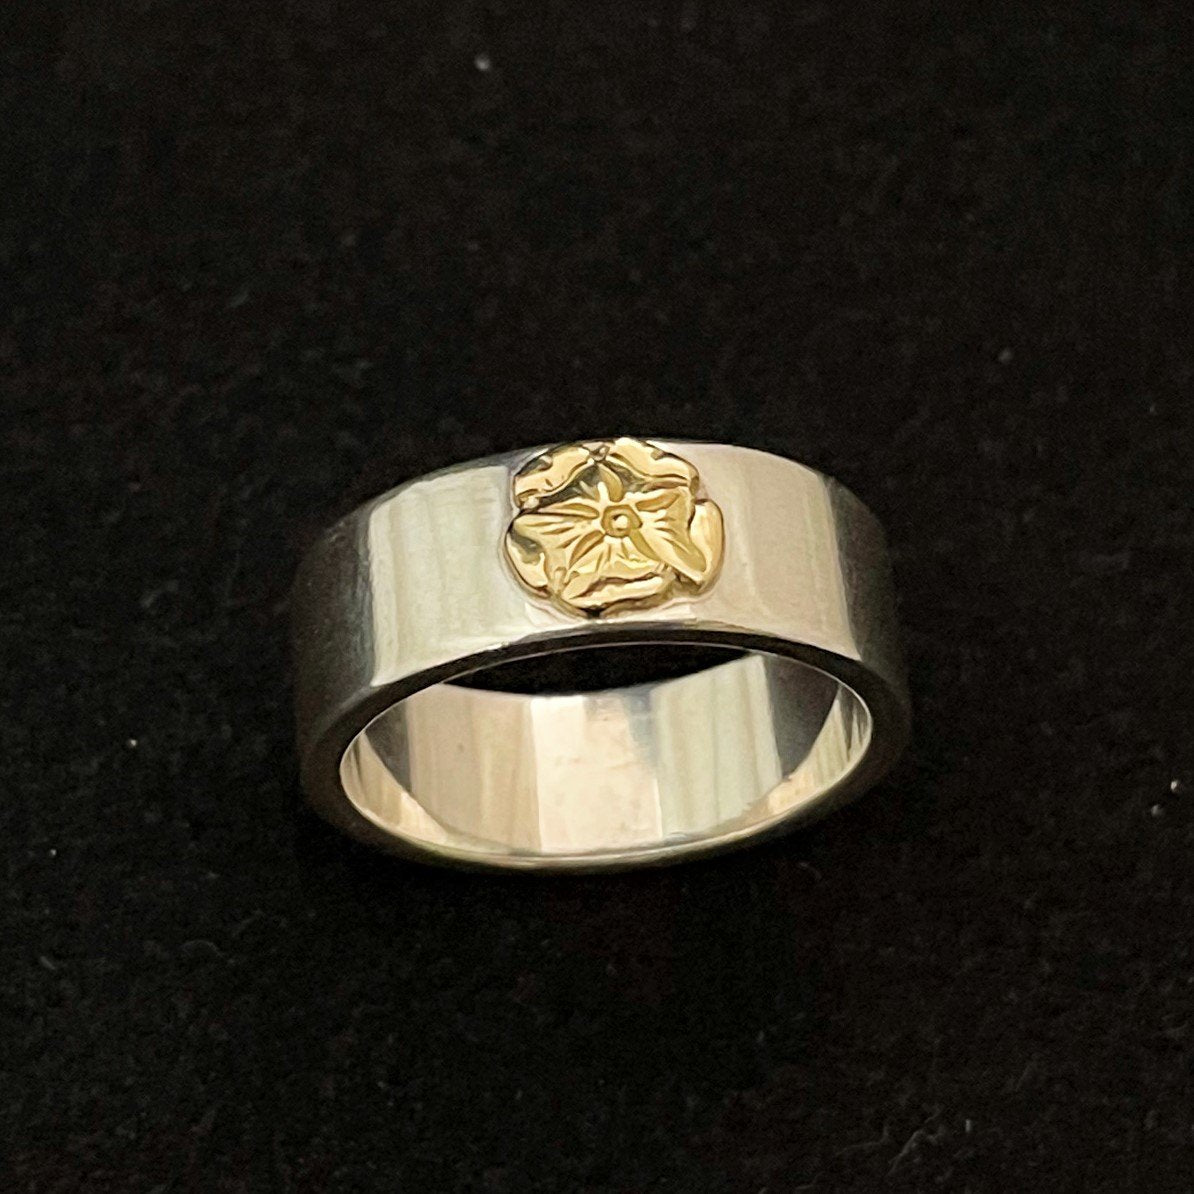 Flattened Rose Ring - Silver and Gold | Goros Authorized Dealer